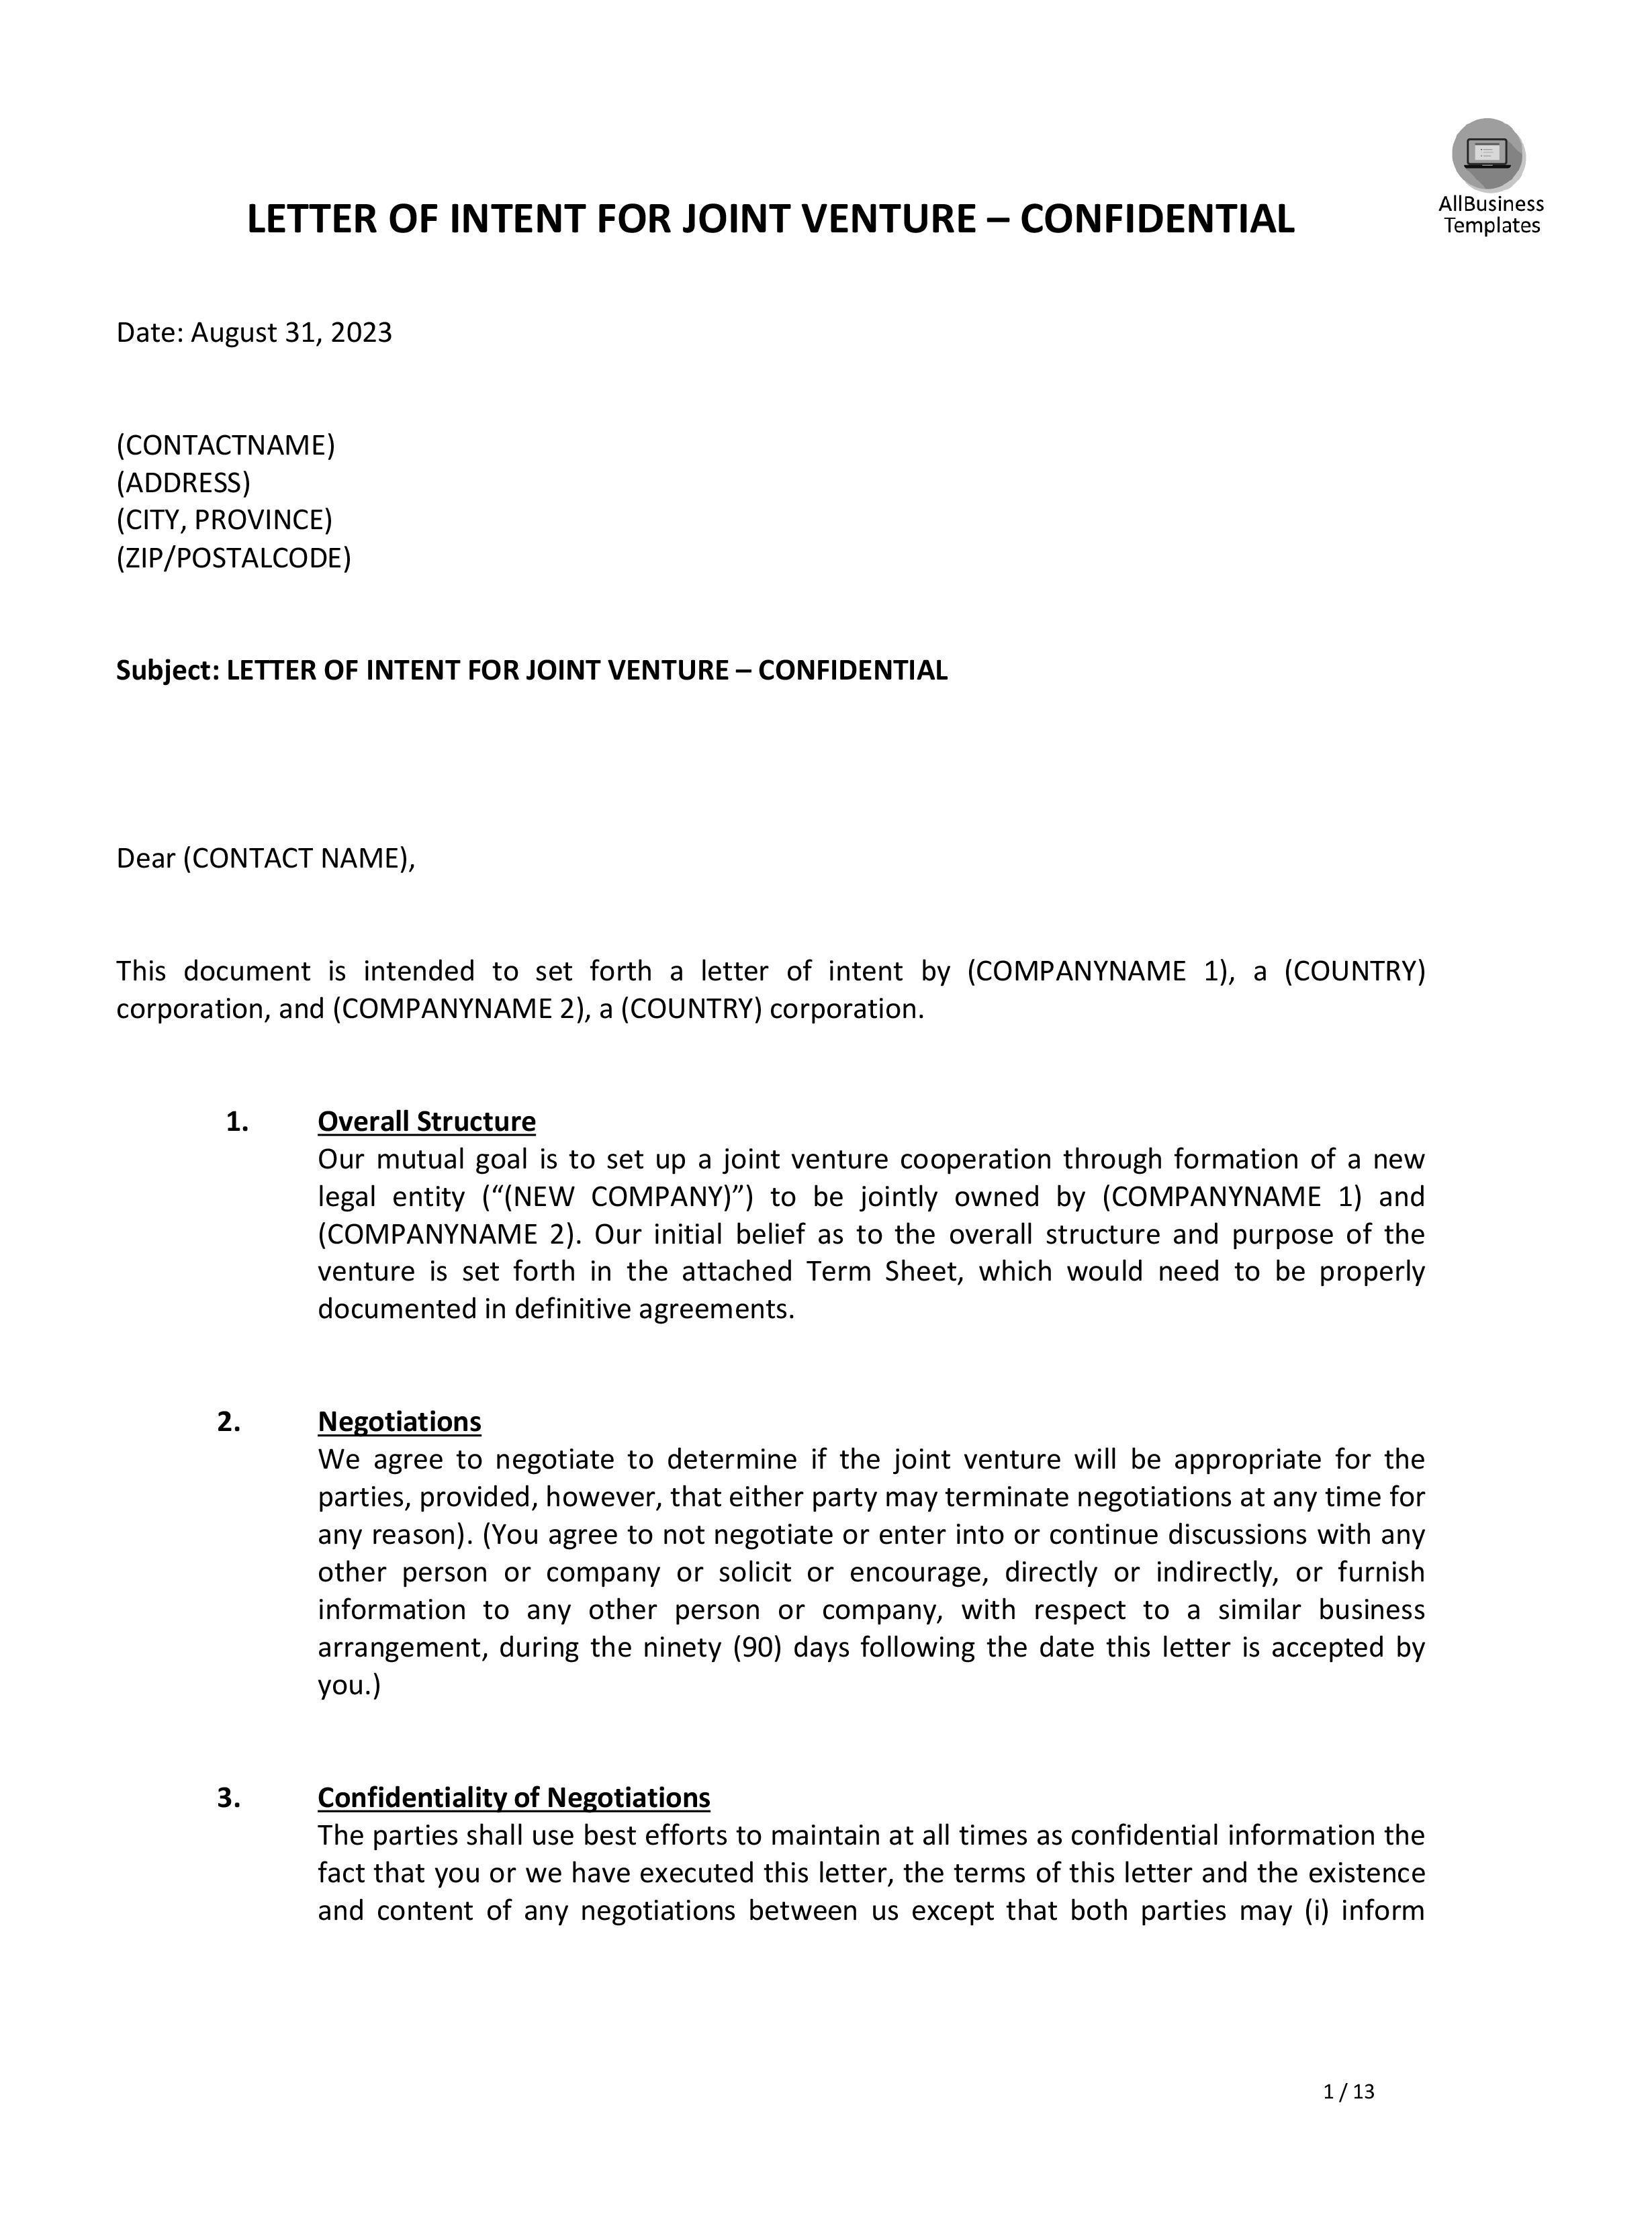 Joint Venture Letter Of Intent Template 模板